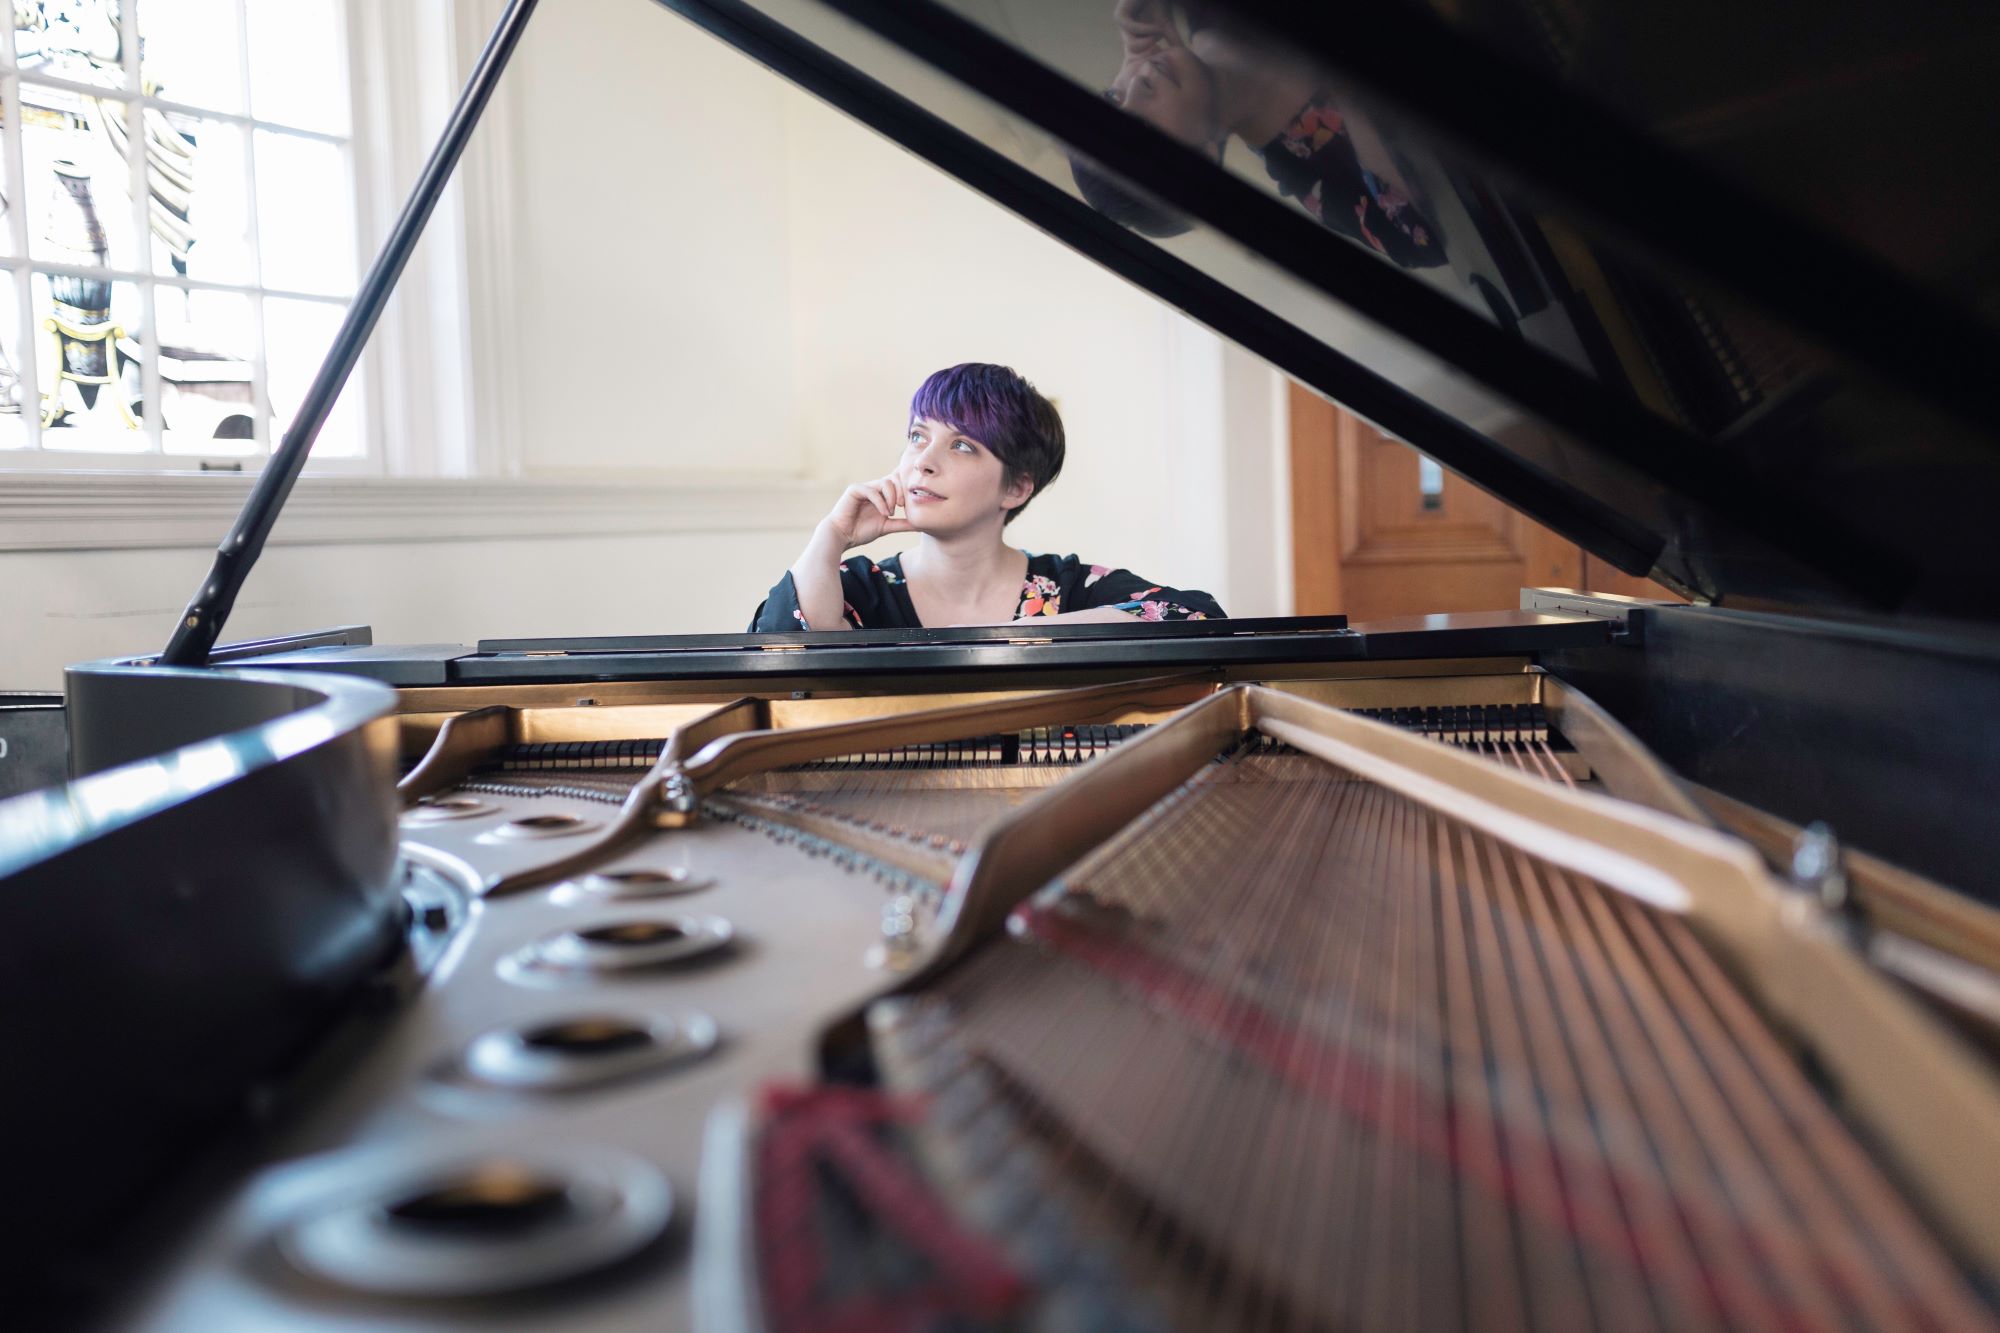 Phd candidate Beth Burton studies Alzheimer's disease while keeping up with her love of piano